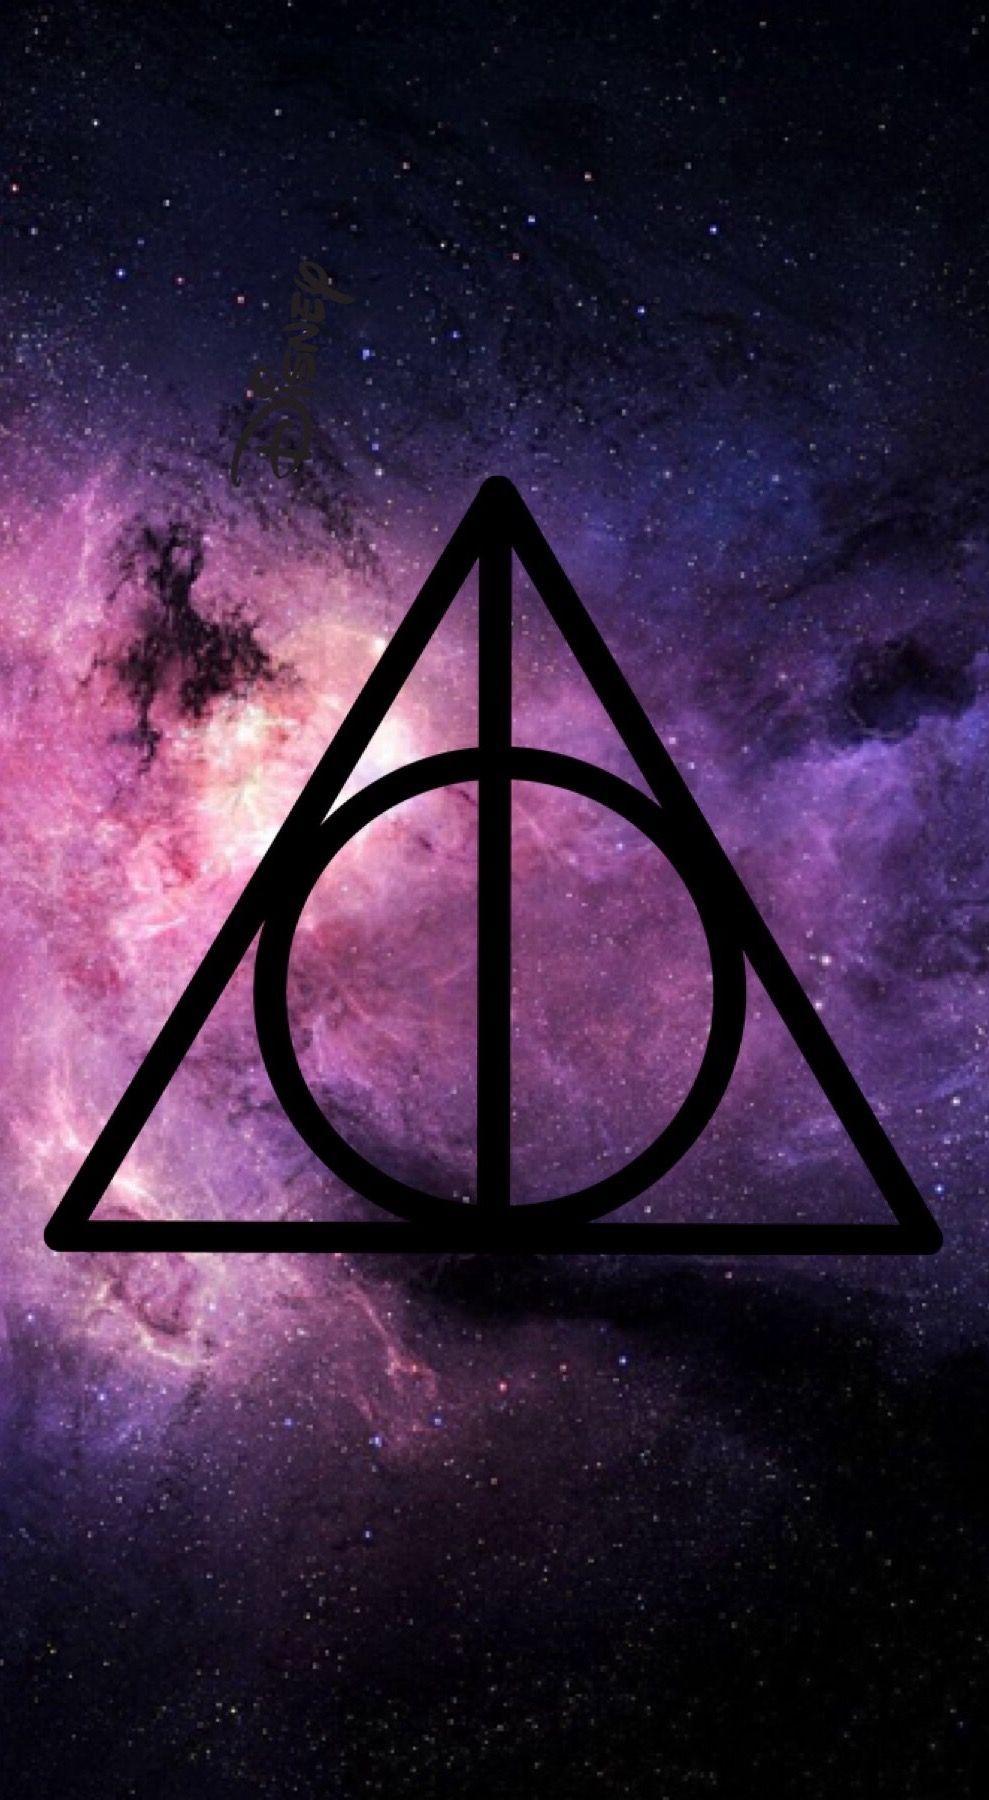 The Deathly Hallows symbol (Harry Potter).. phone wallpaper